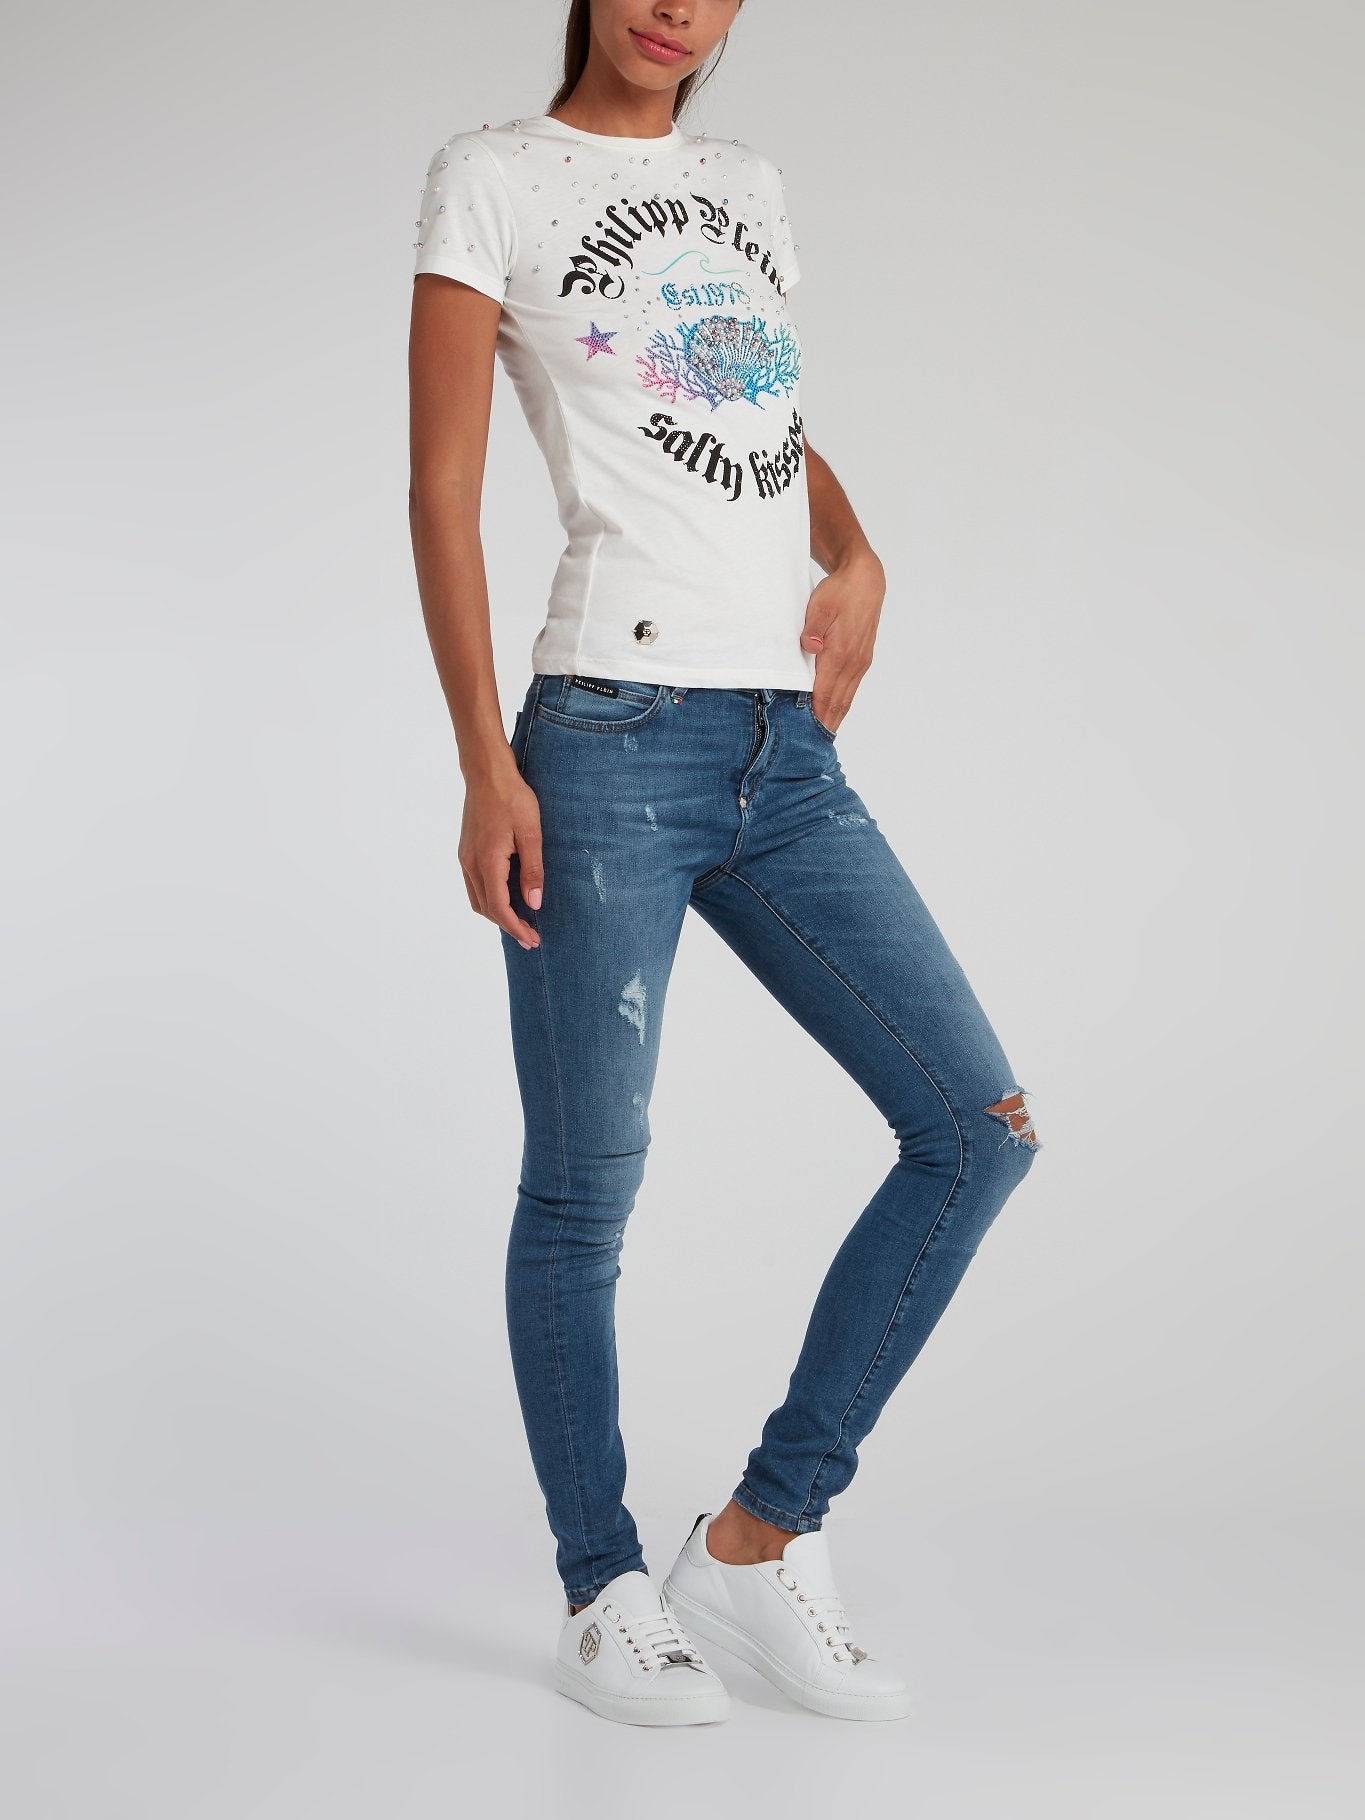 White Pearl Embellished Statement T-Shirt